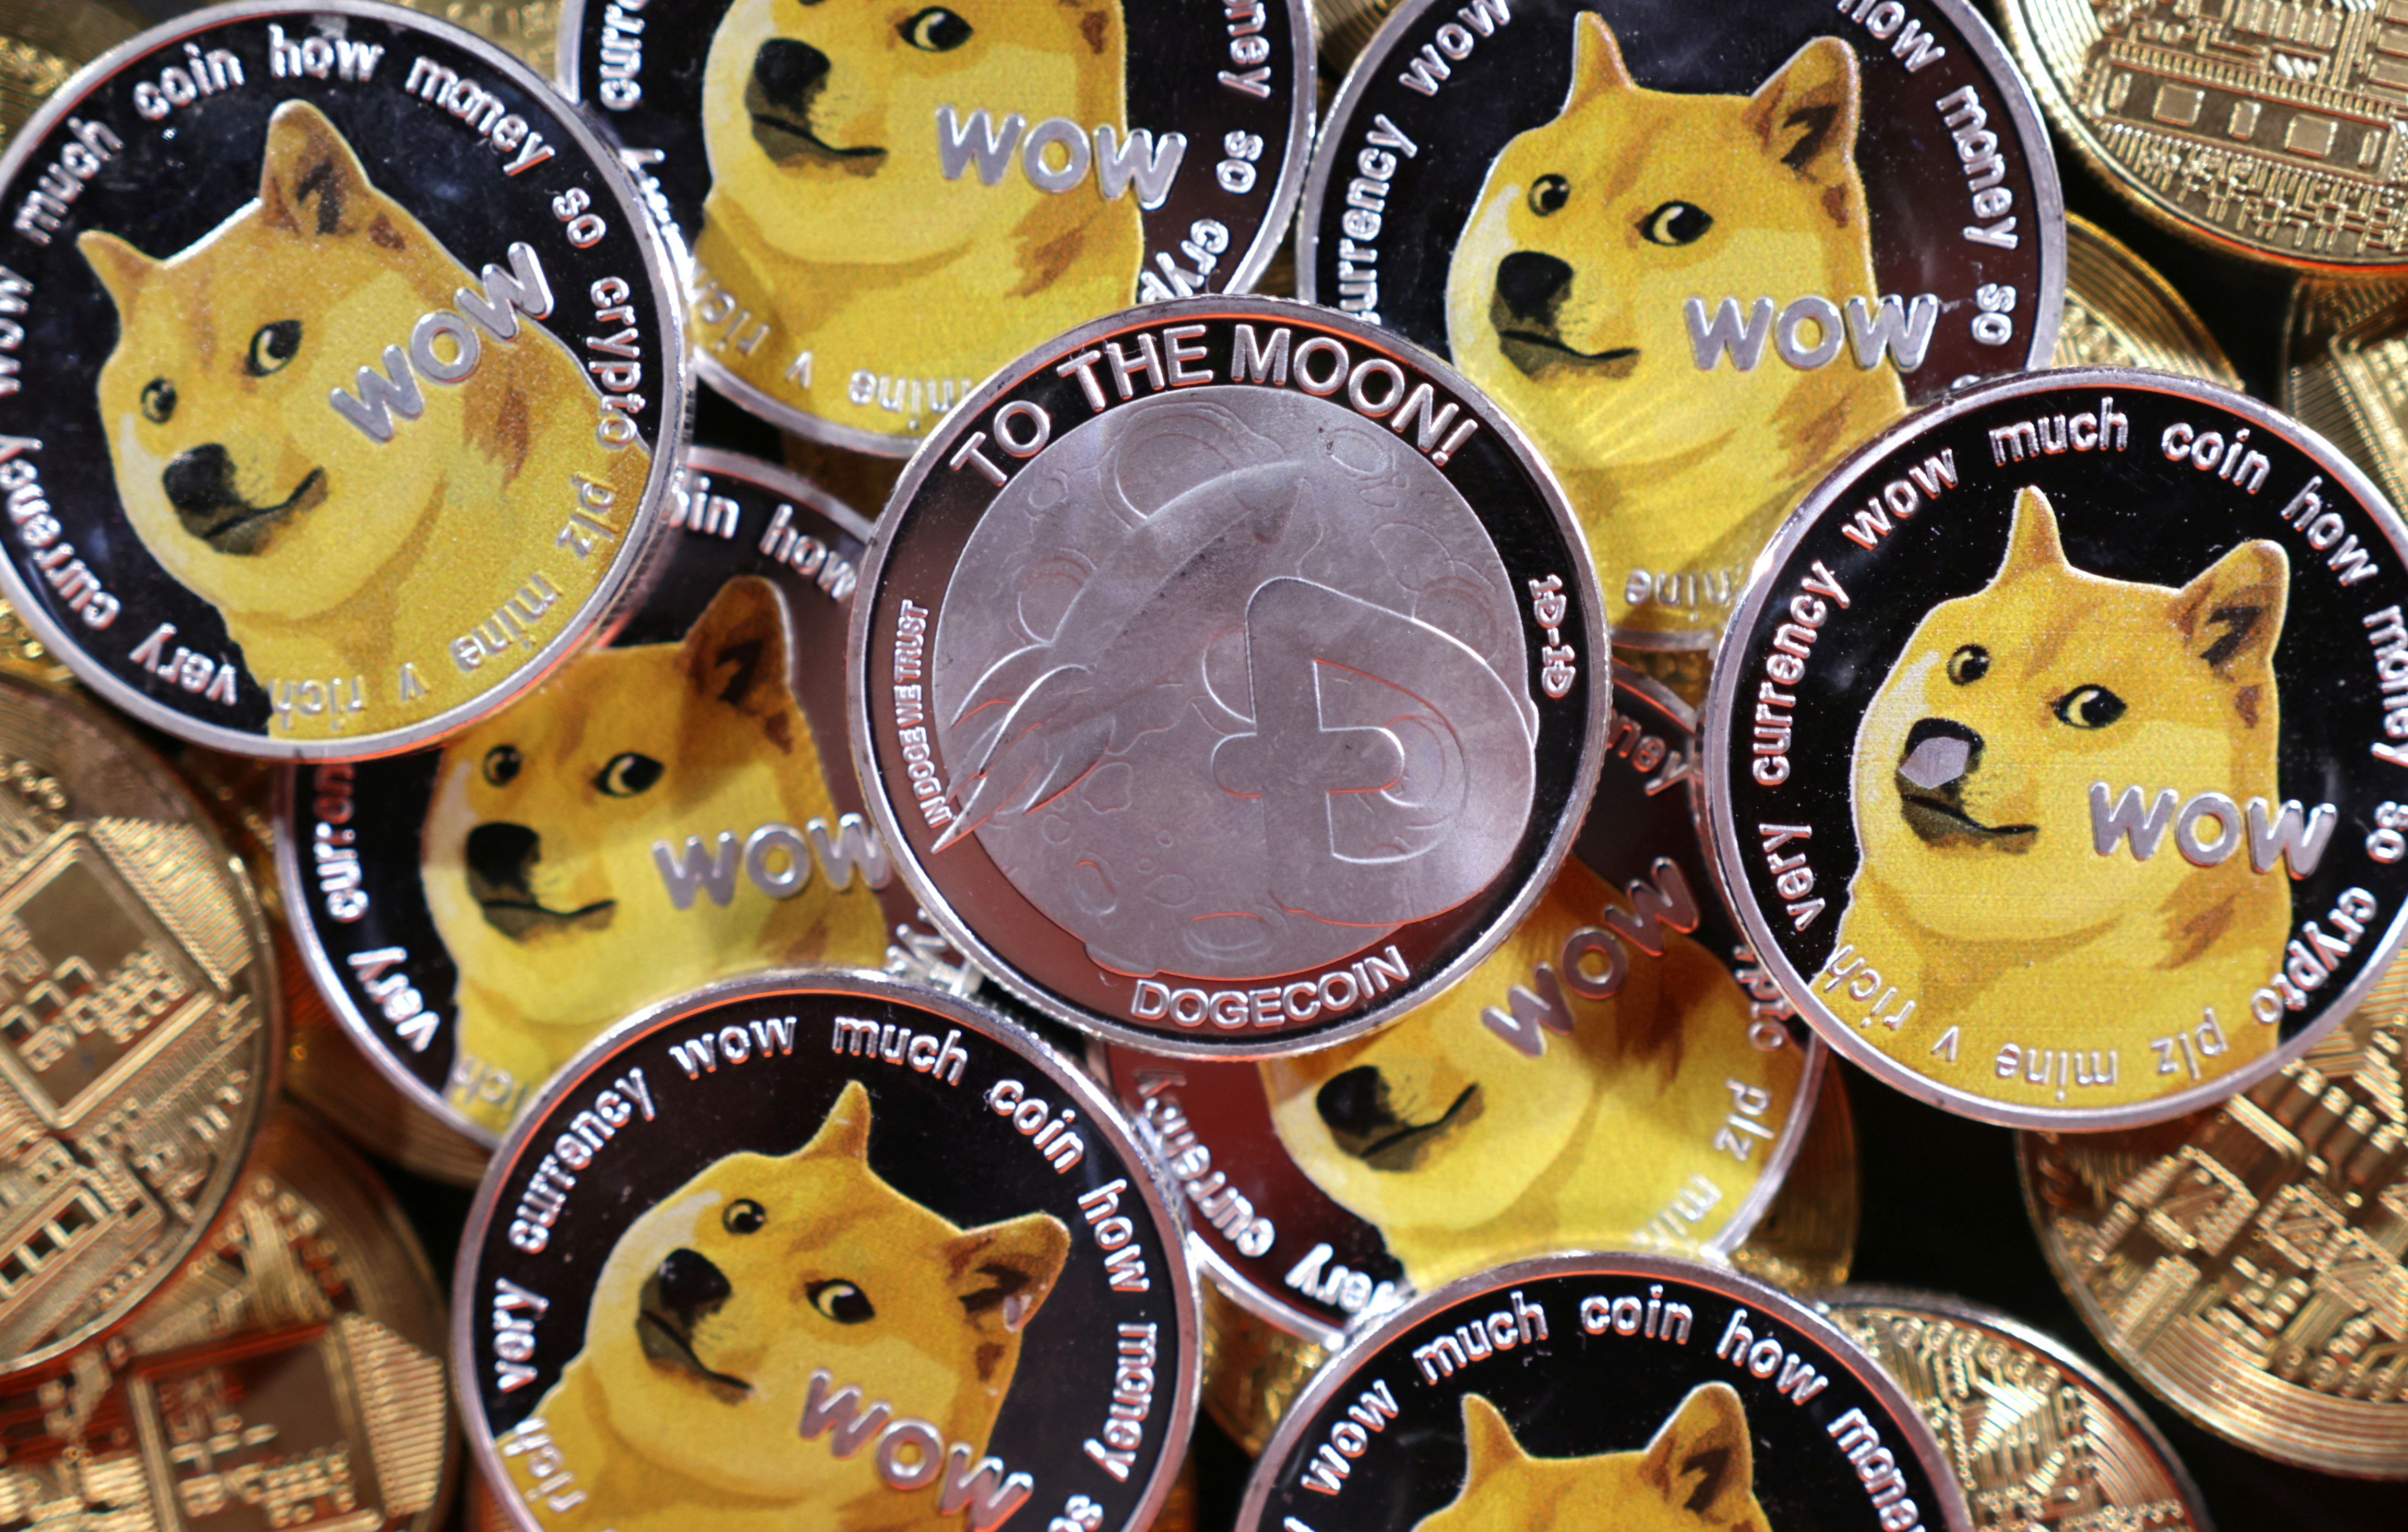 Illustration shows representations of cryptocurrency Dogecoin